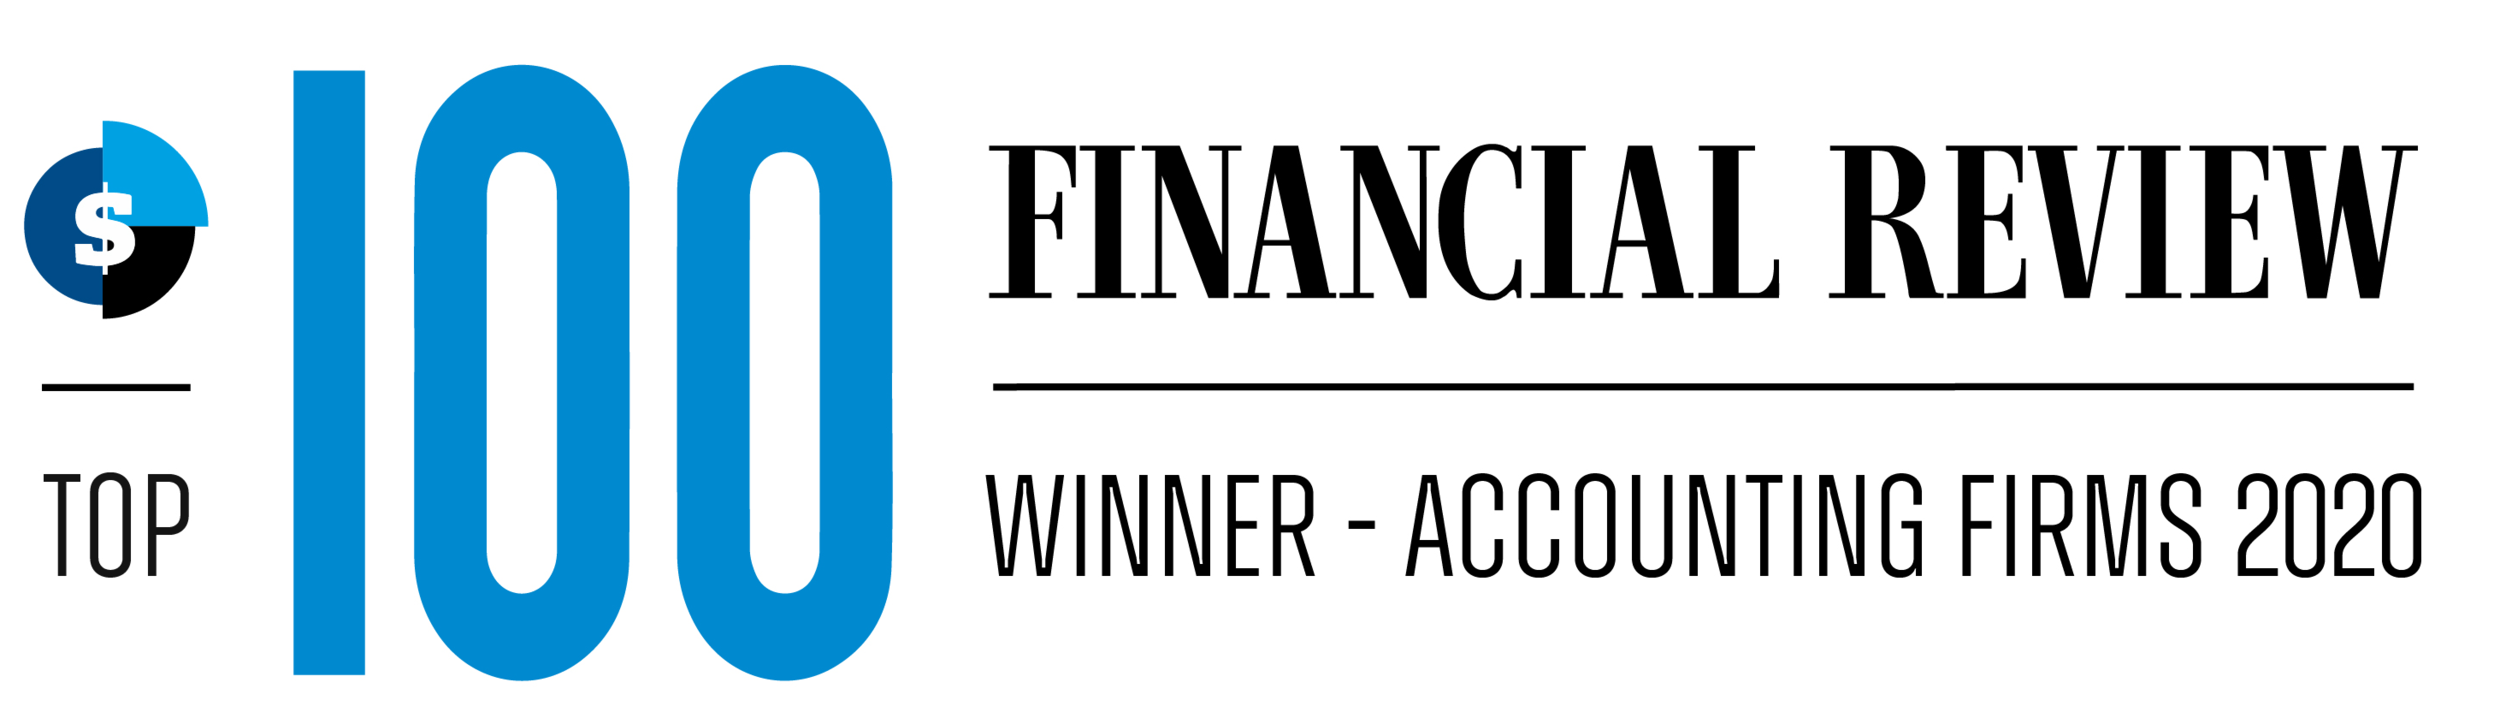 Top 100 Financial Review winner accounting firms 2020